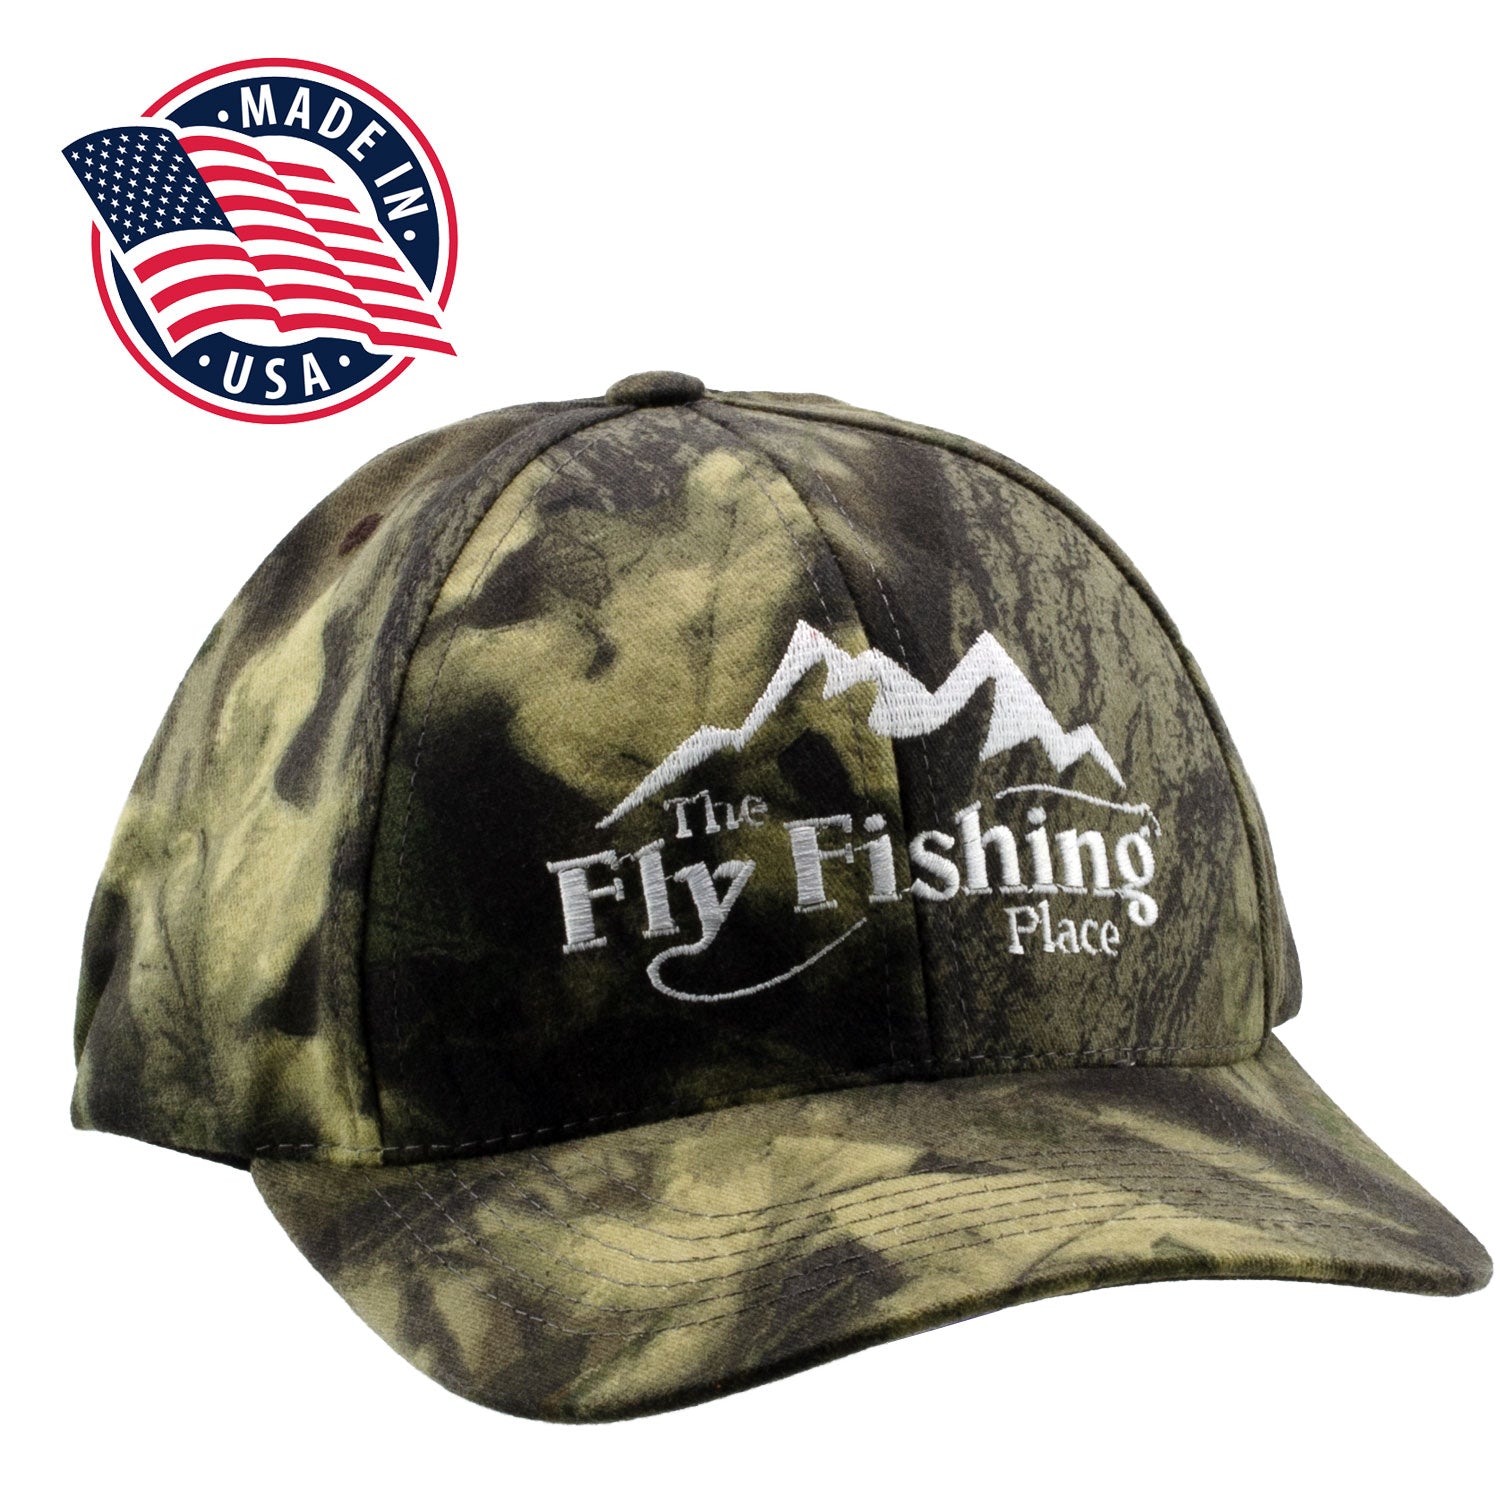 The Fly Fishing Place Logo Cap | Low Profile Mossy Oak Break Up Camo | Made In The USA